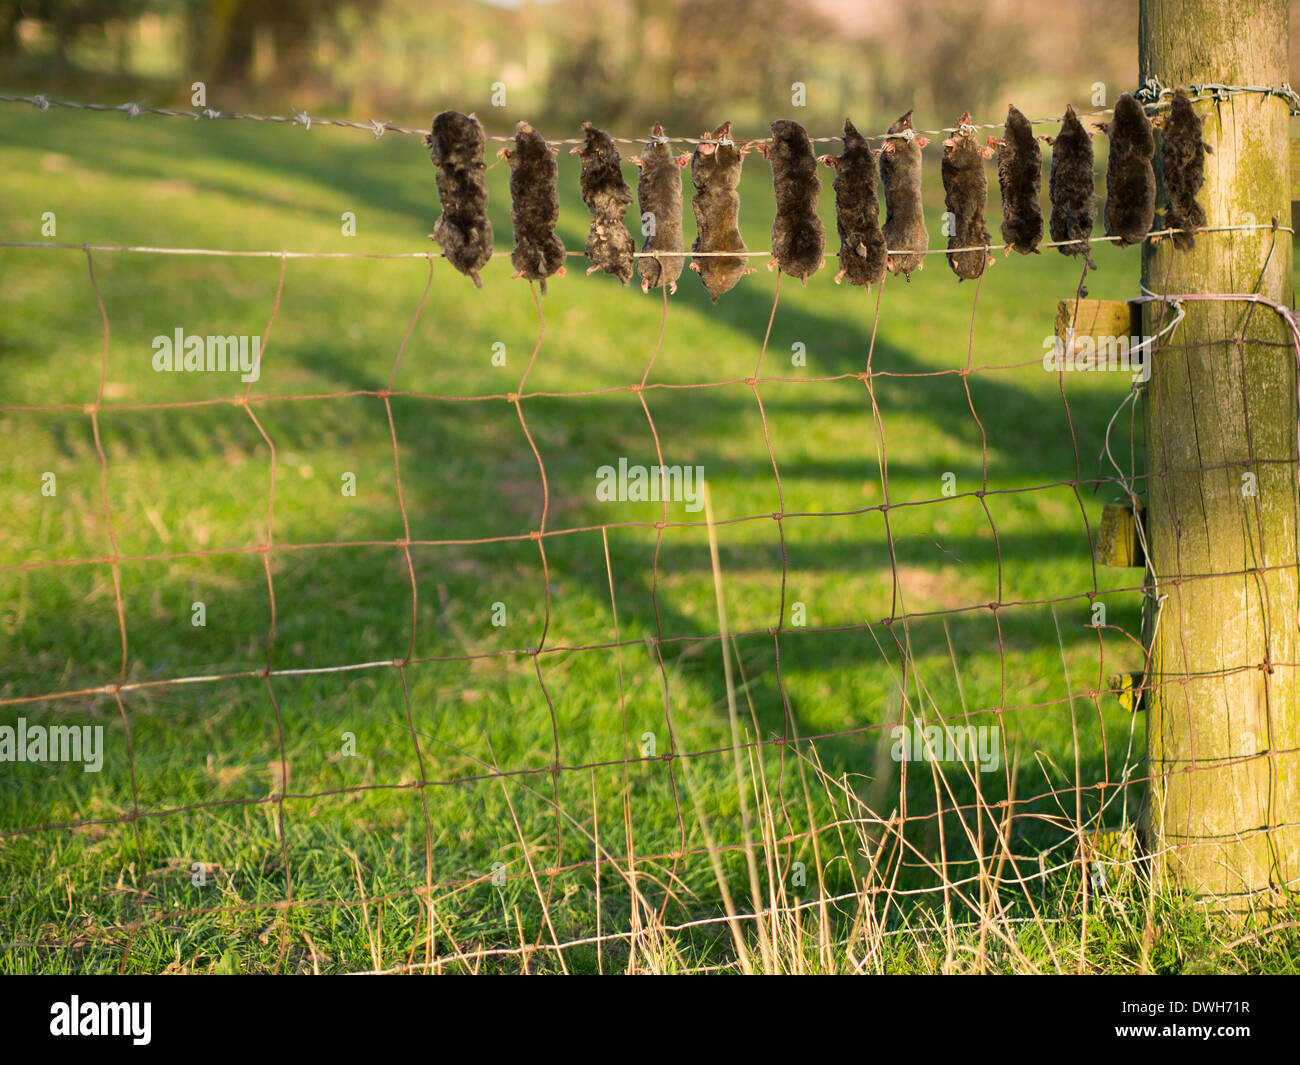 Dead Moles Hanging from a Fence Stock Photo